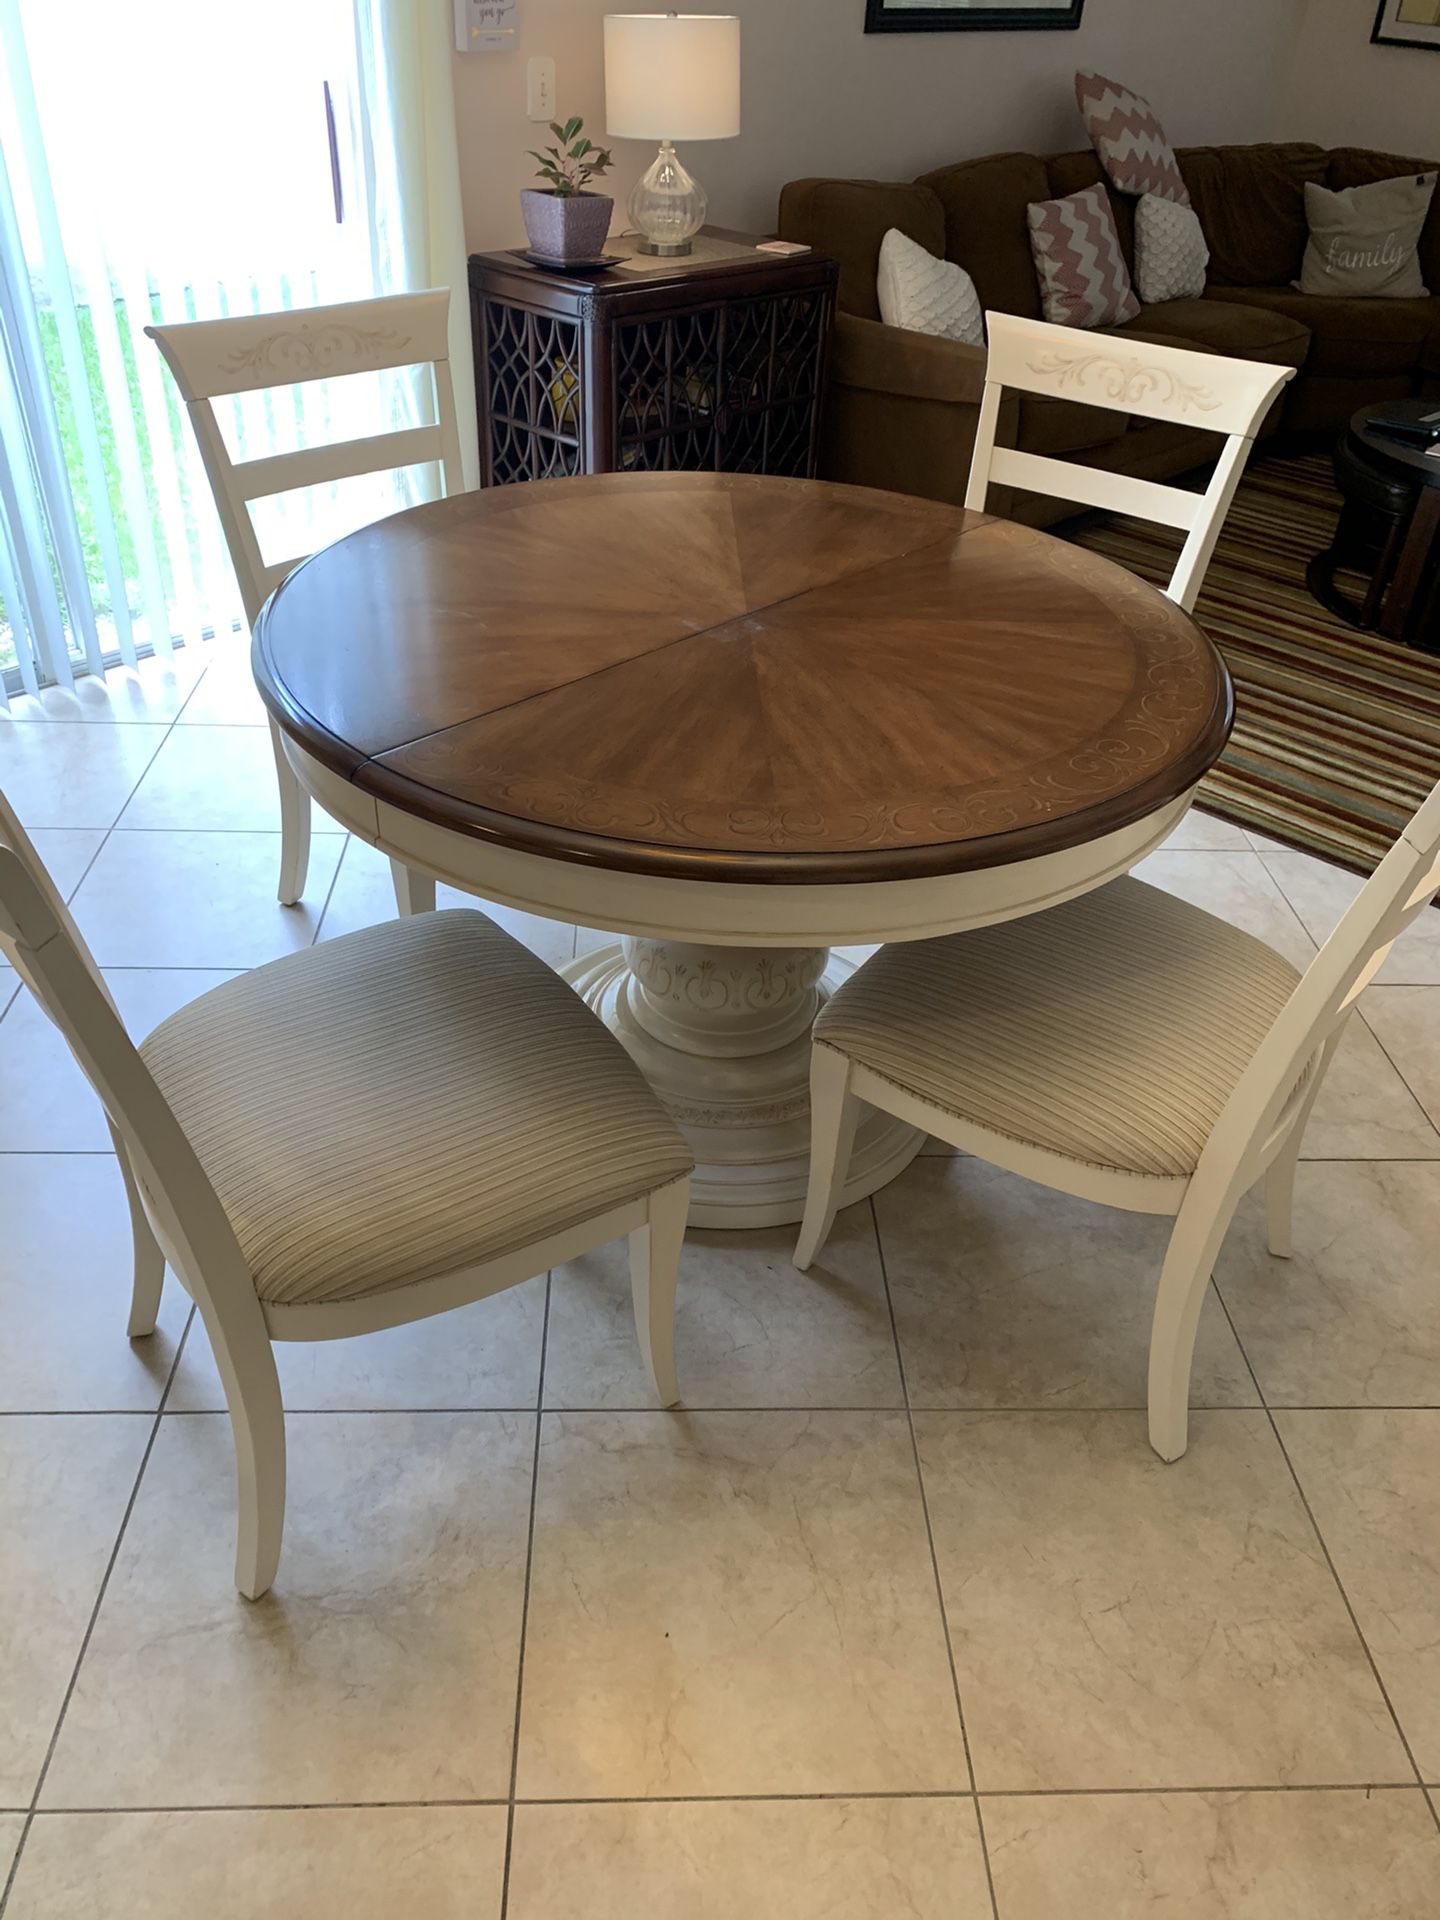 Round kitchen table with four chairs with extension table to fix six. Priced to sell.